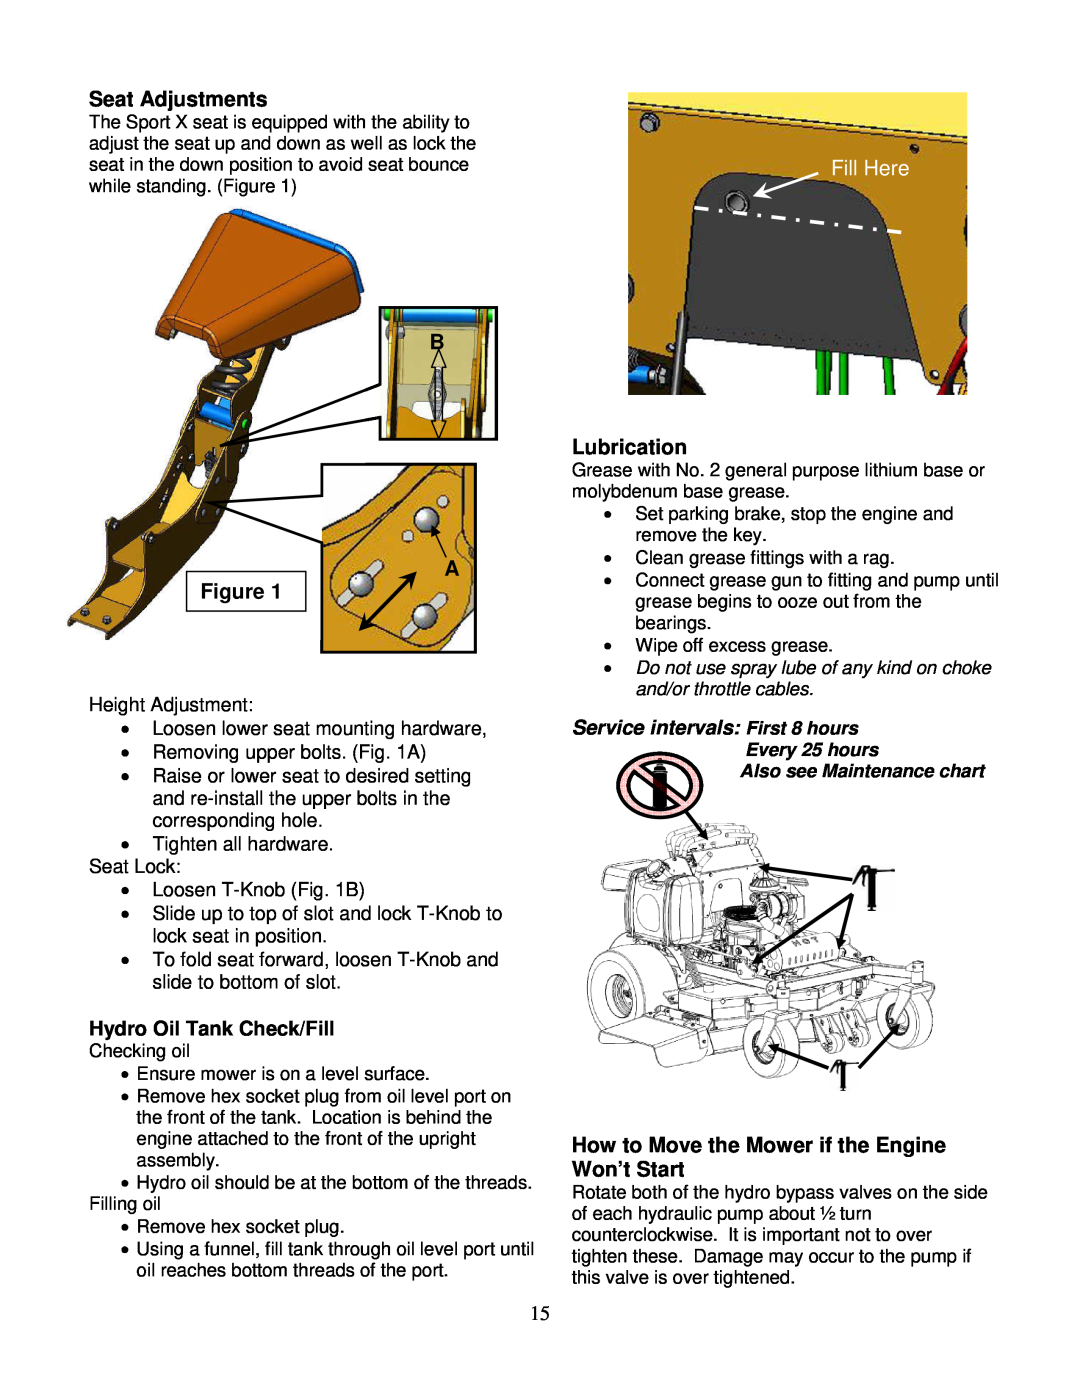 Wright Manufacturing 14SH654 Seat Adjustments, Fill Here, Lubrication, How to Move the Mower if the Engine Won’t Start 